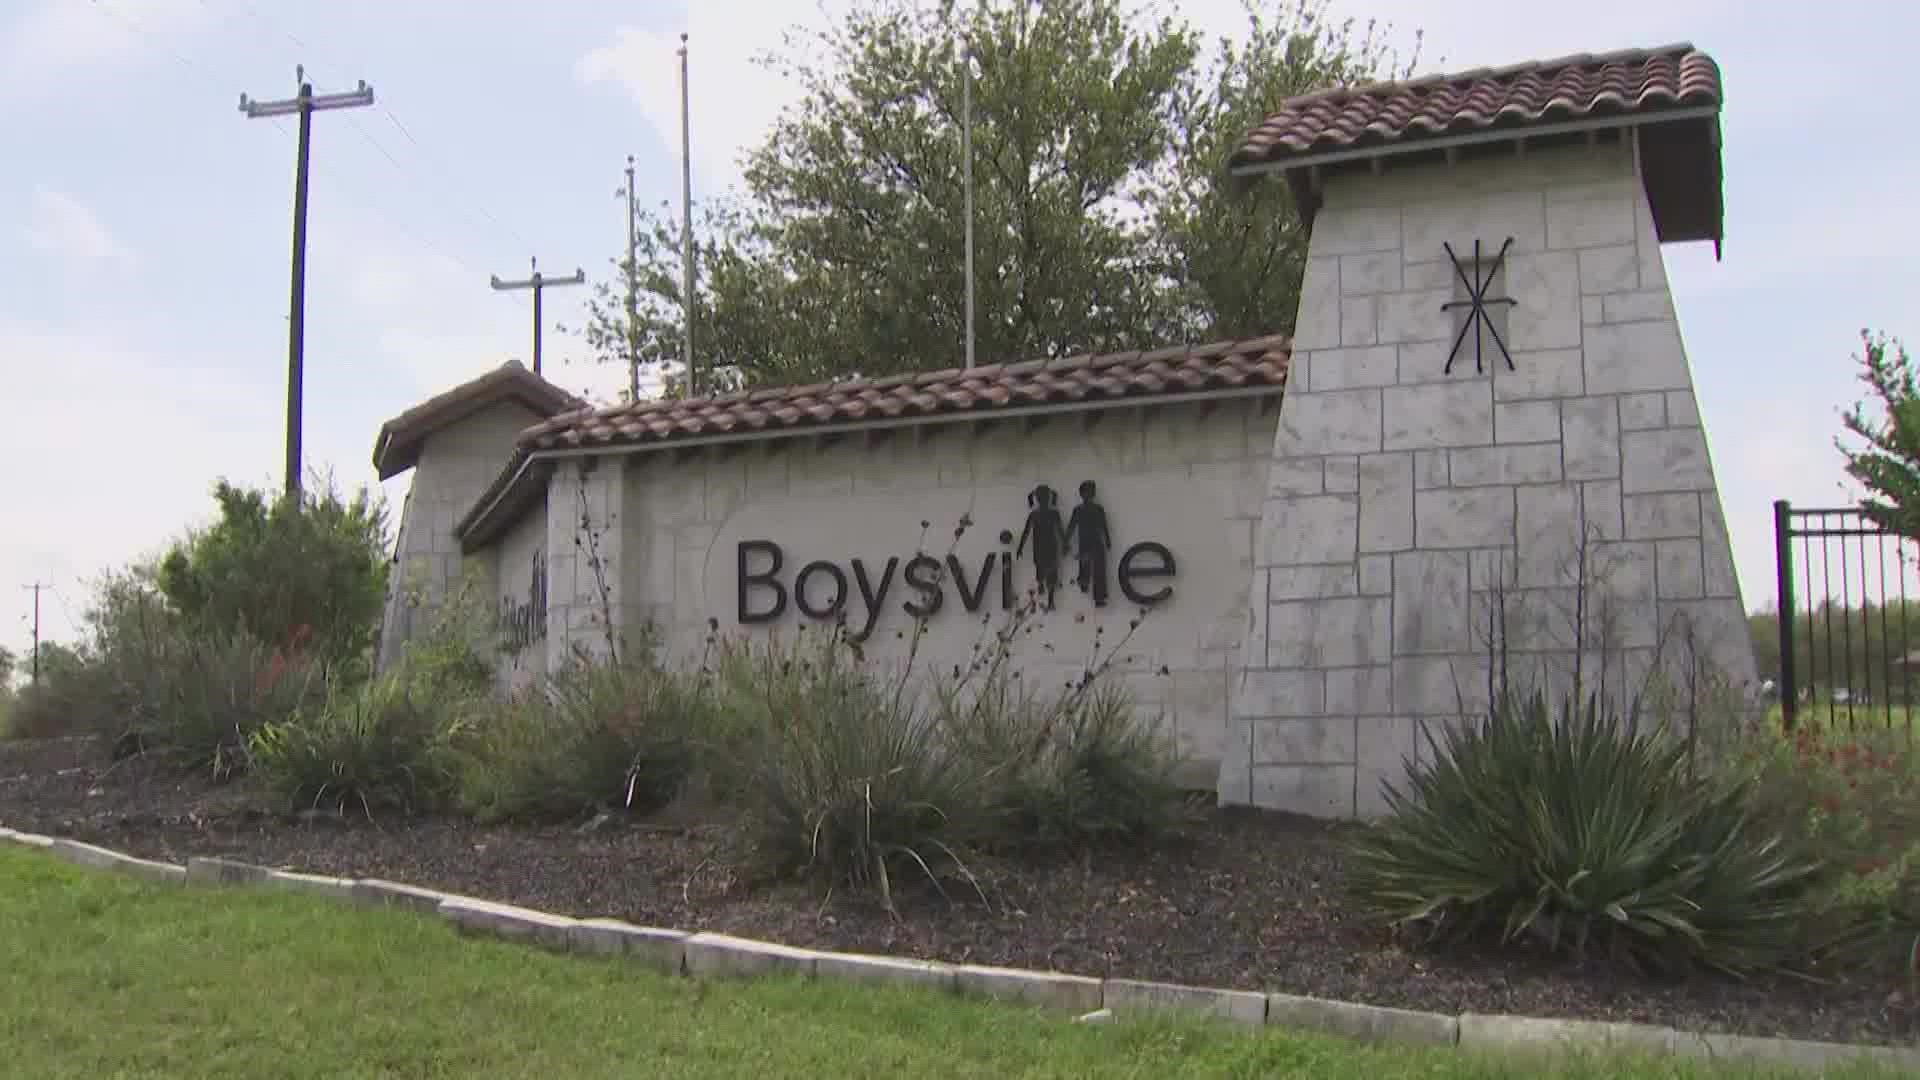 From foster care, to it's emergency shelter, Boysville is there for young folks in need.